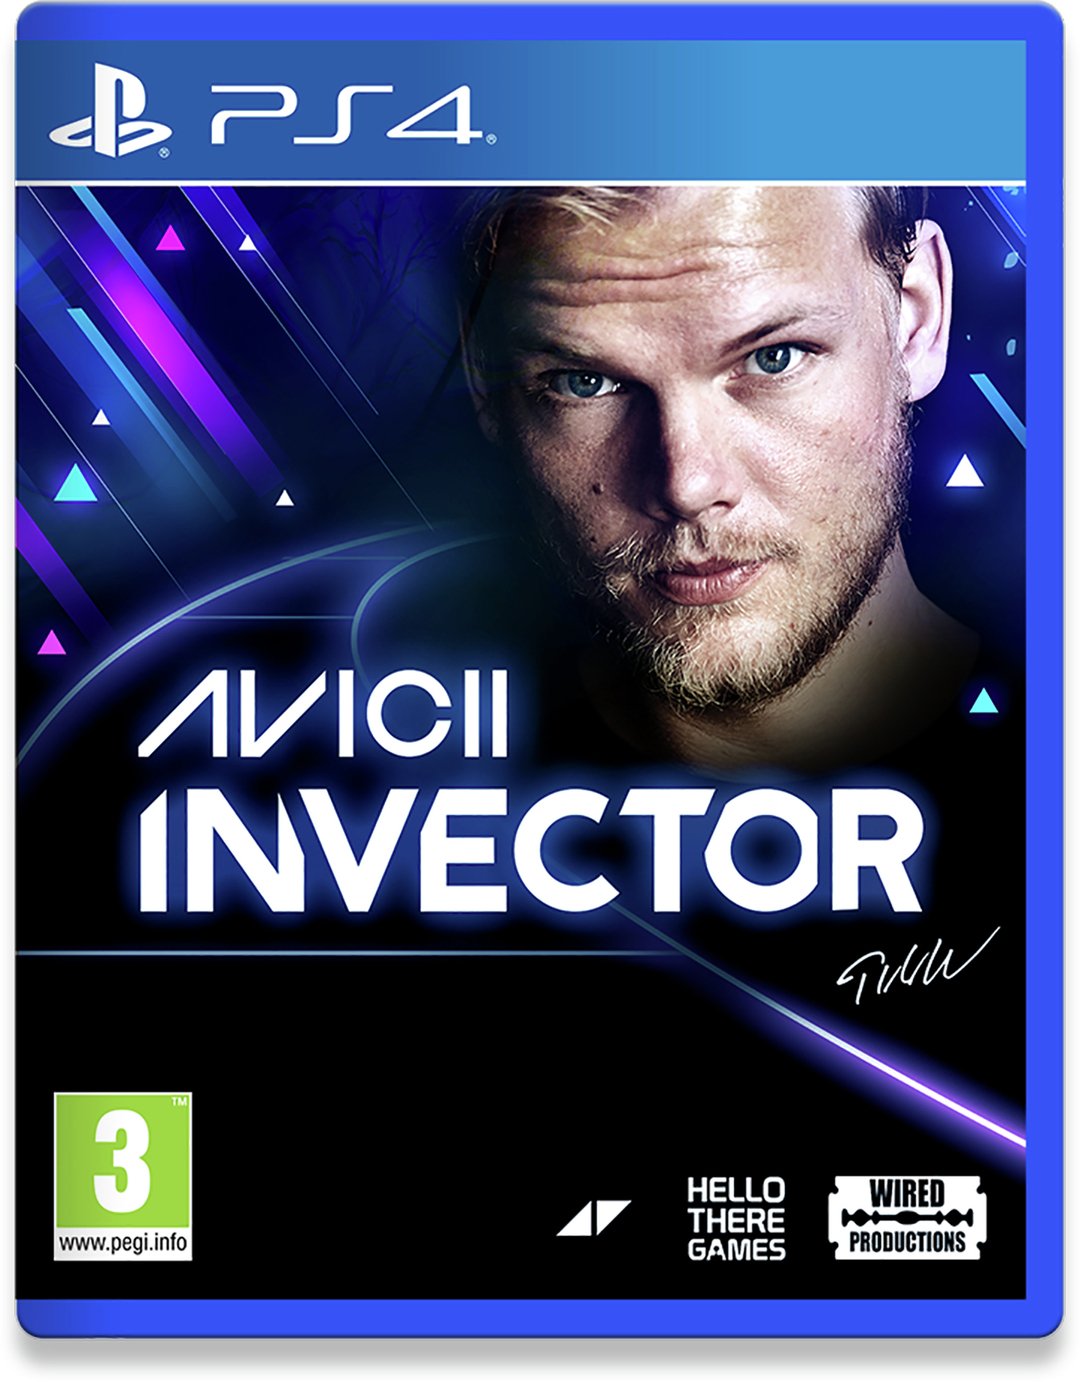 AVICII Invector PS4 Game Review